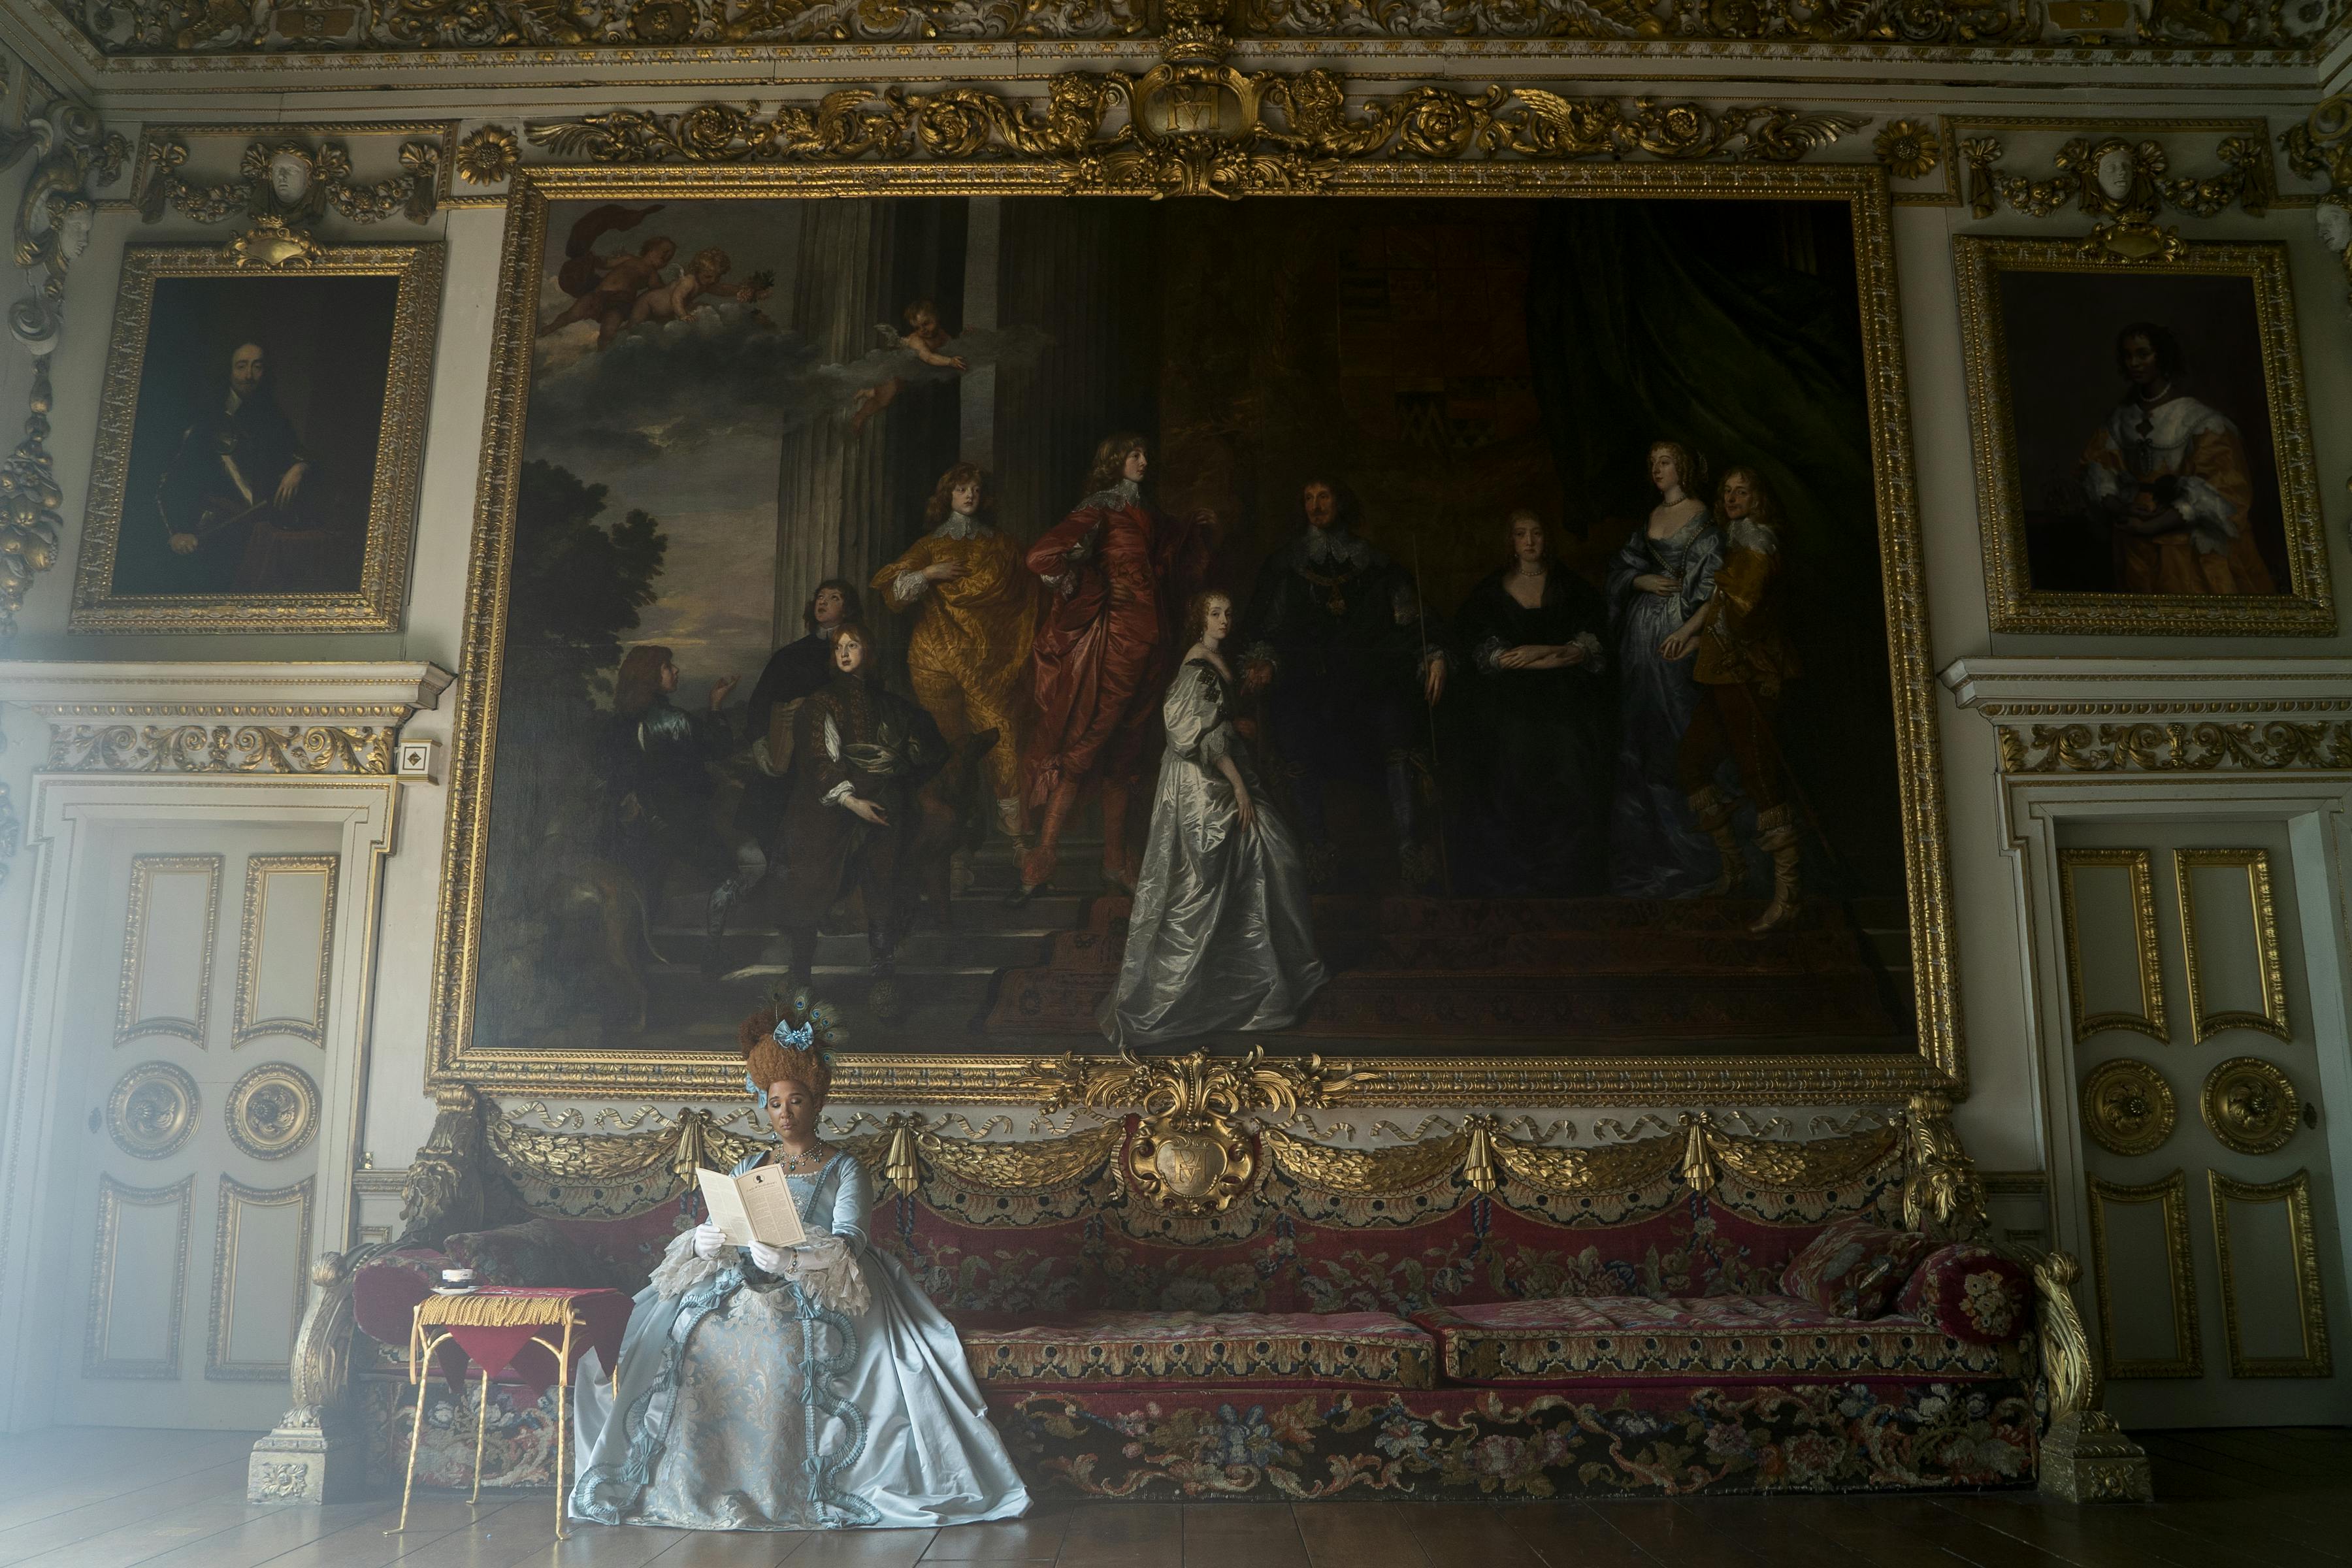 The Queen rests on an ornate couch patterned with gold trimming and red patterns. She wears a blue dress and blue headpiece. Behind her is a massive painting. 